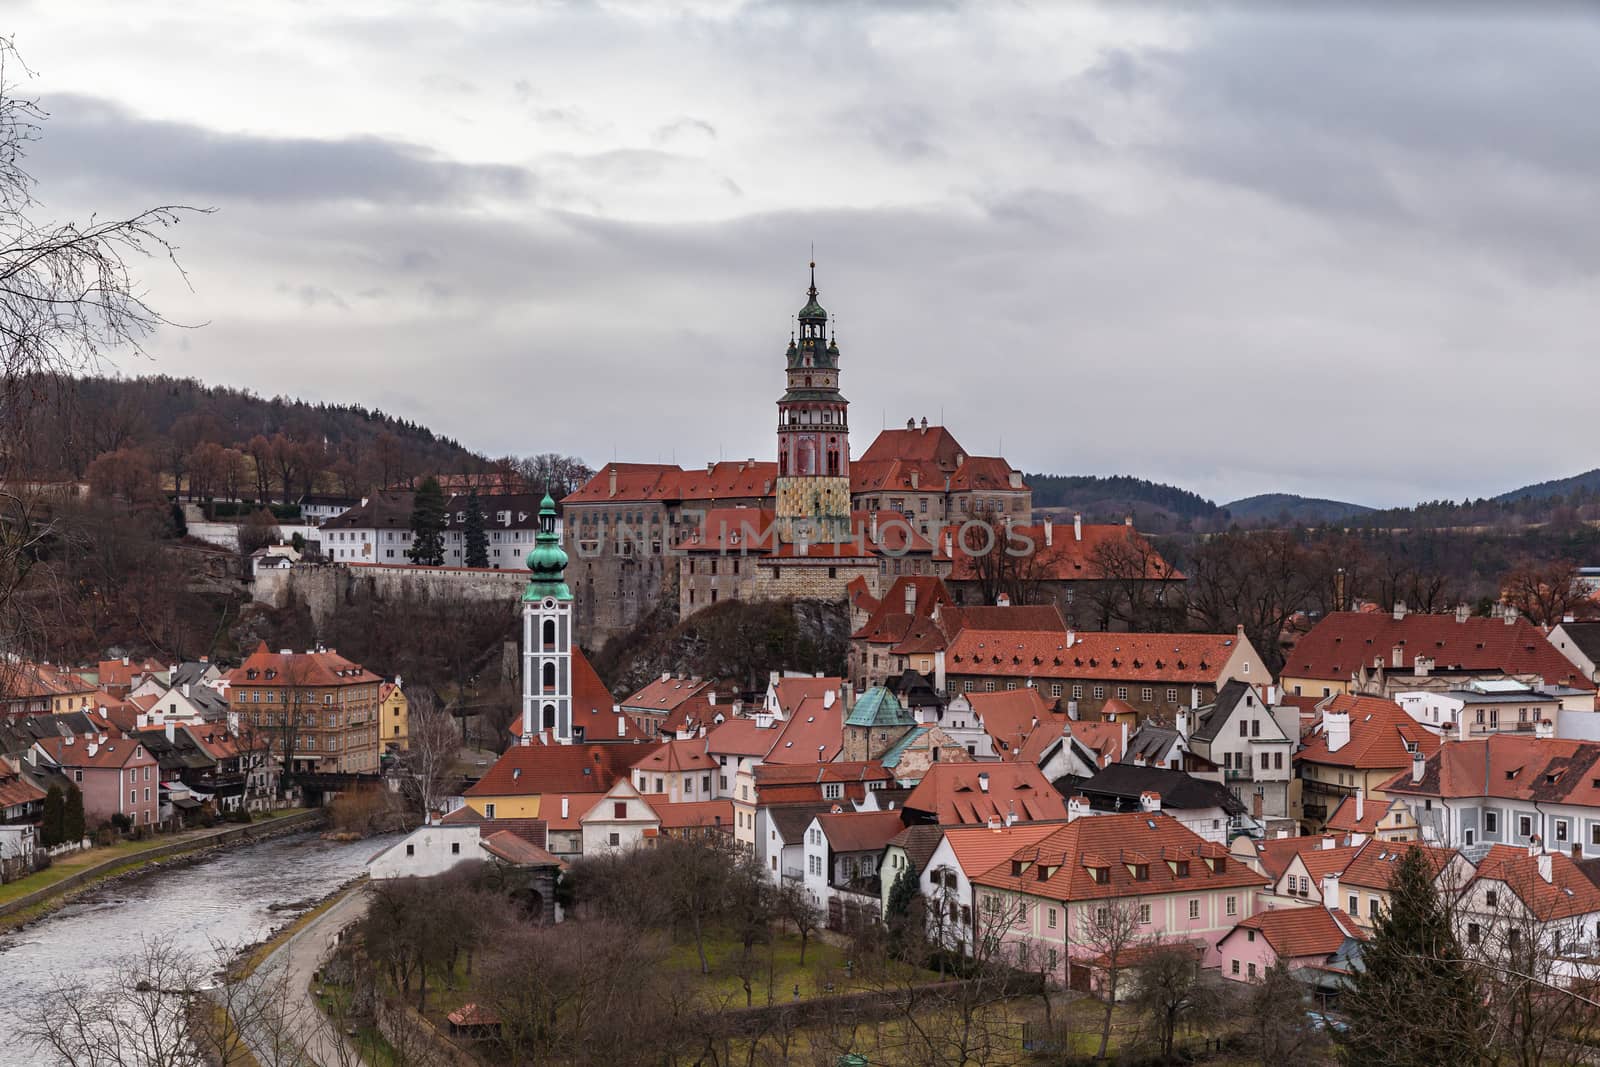 Aerial panorama view of Český Krumlov old town with the Cesky Krumlov castle and tower in background and Vltava river flowing around on a cloudy day, Czech Republic